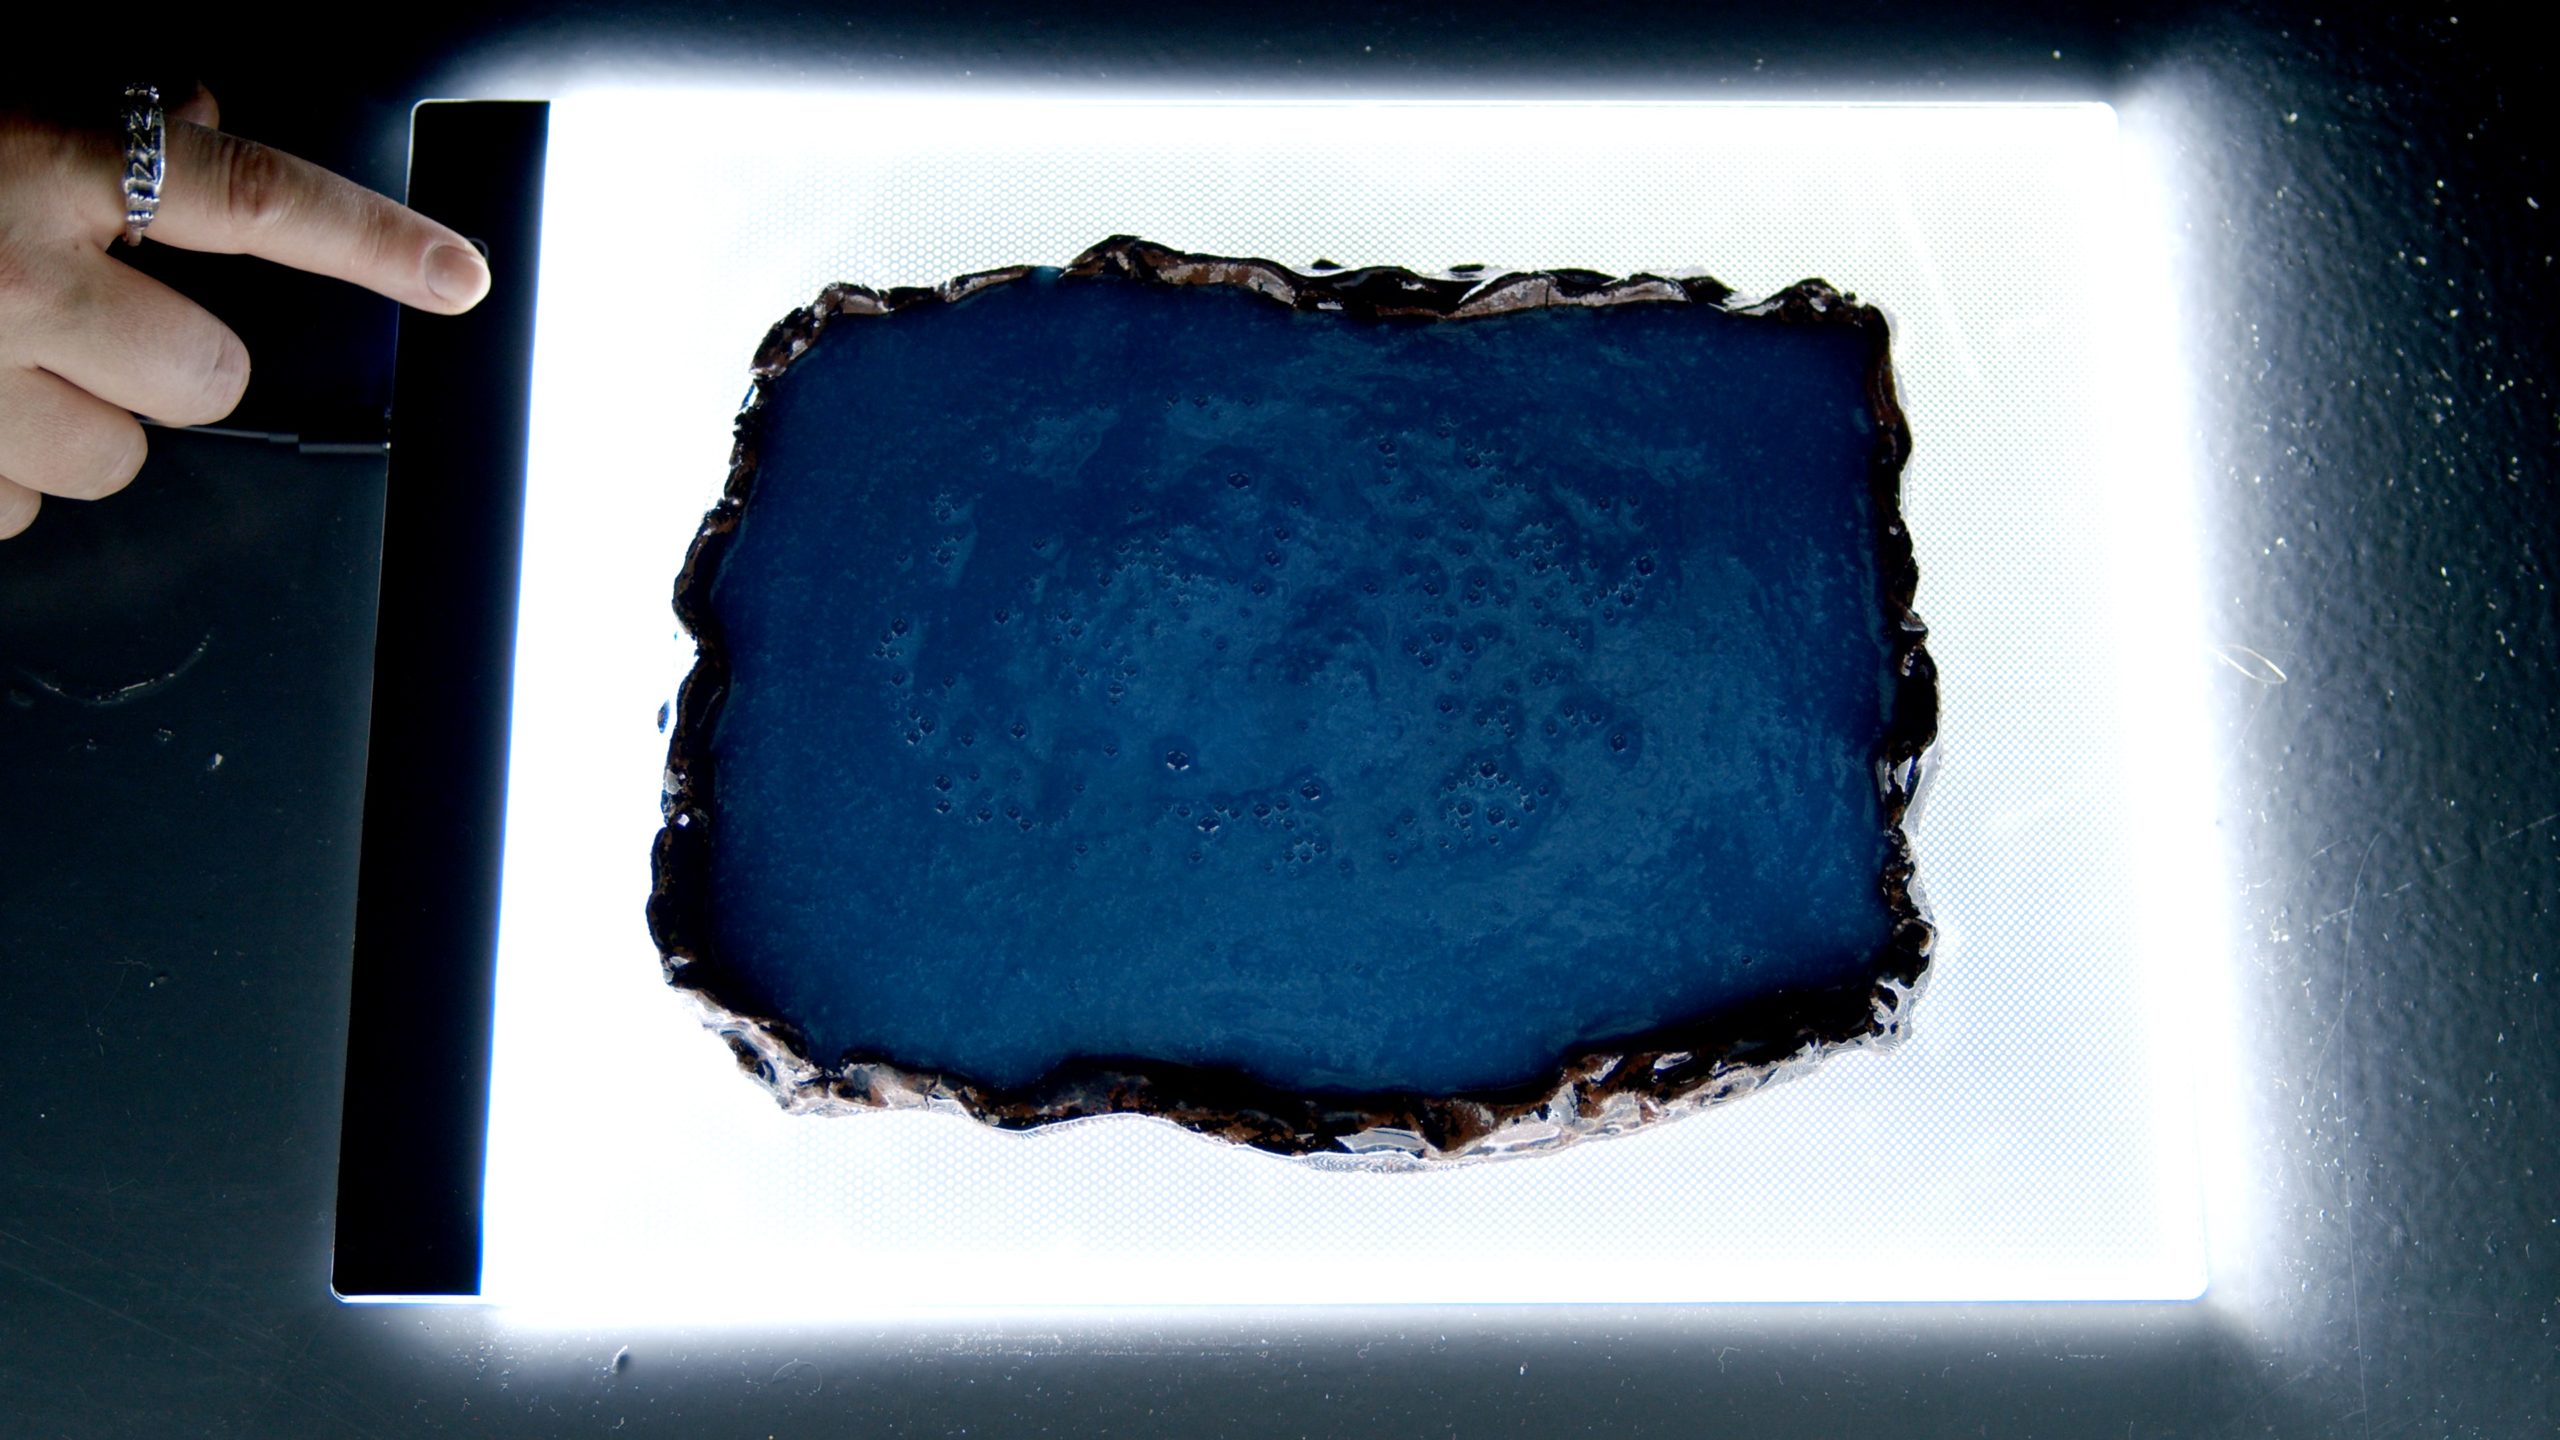 On a glowing led lightbox is a ceramic tray with erratic edges filled with blue liquid. A finger wearing a silver ring touches the power button on the lightbox